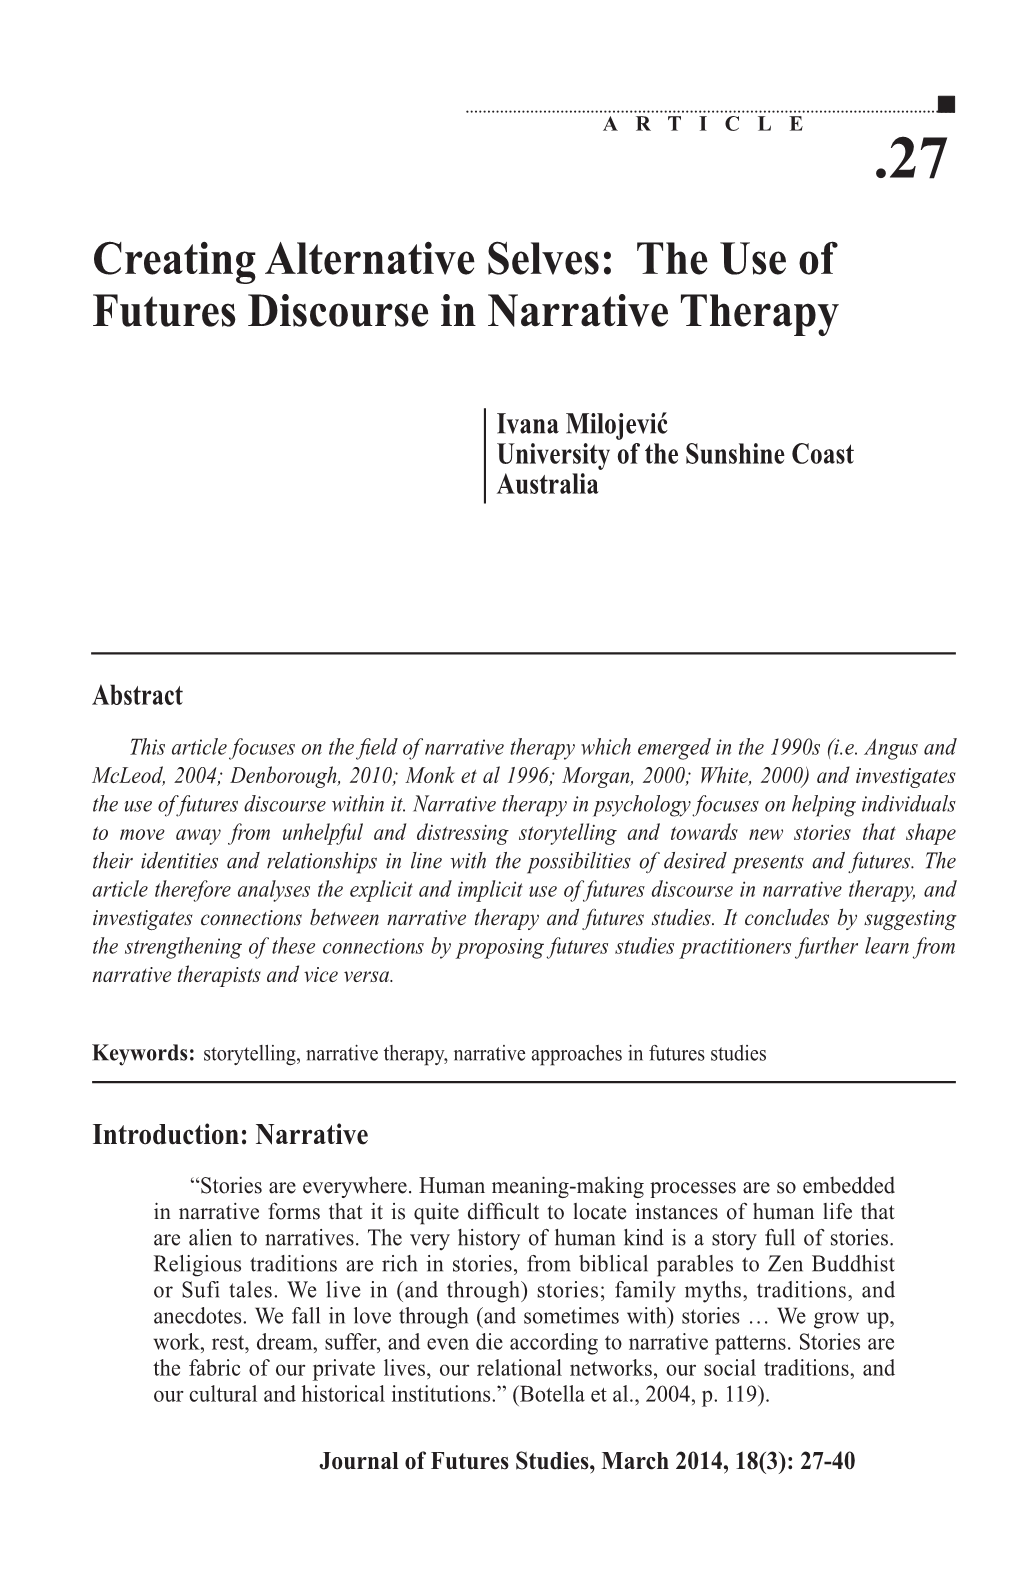 The Use of Futures Discourse in Narrative Therapy